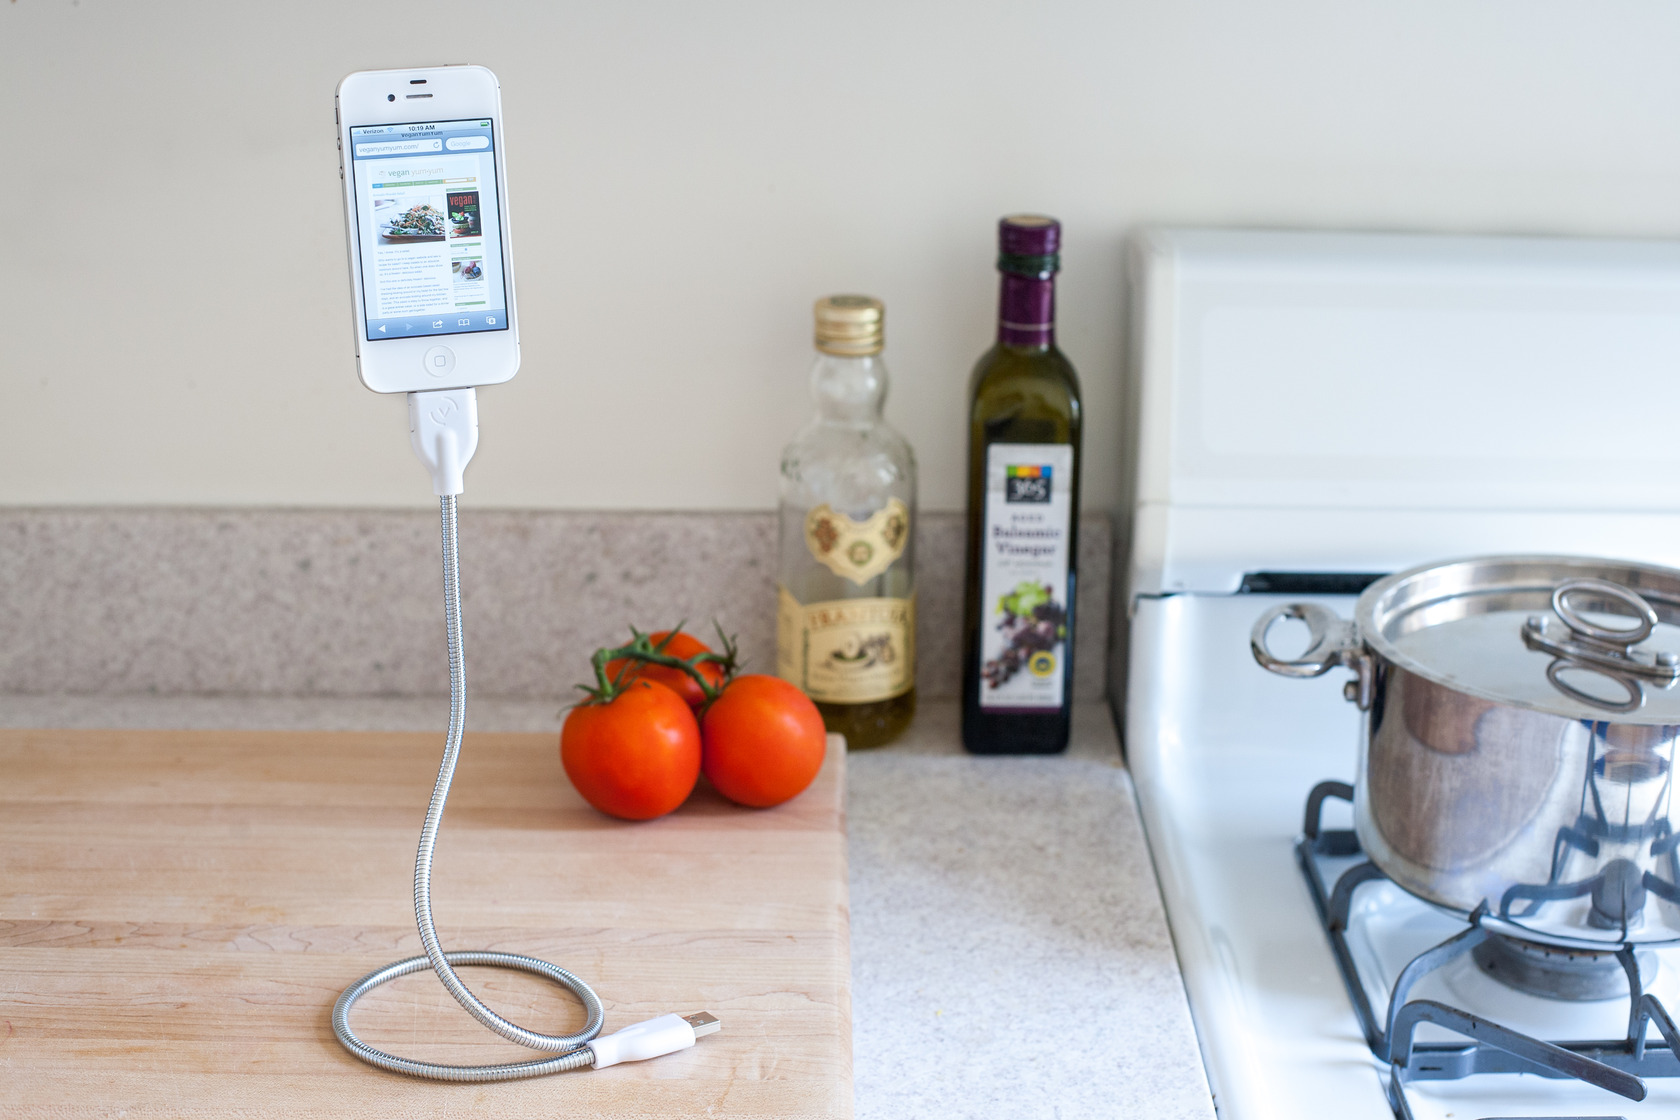 Meet Bobine: A smart phone charger and tripod all in one